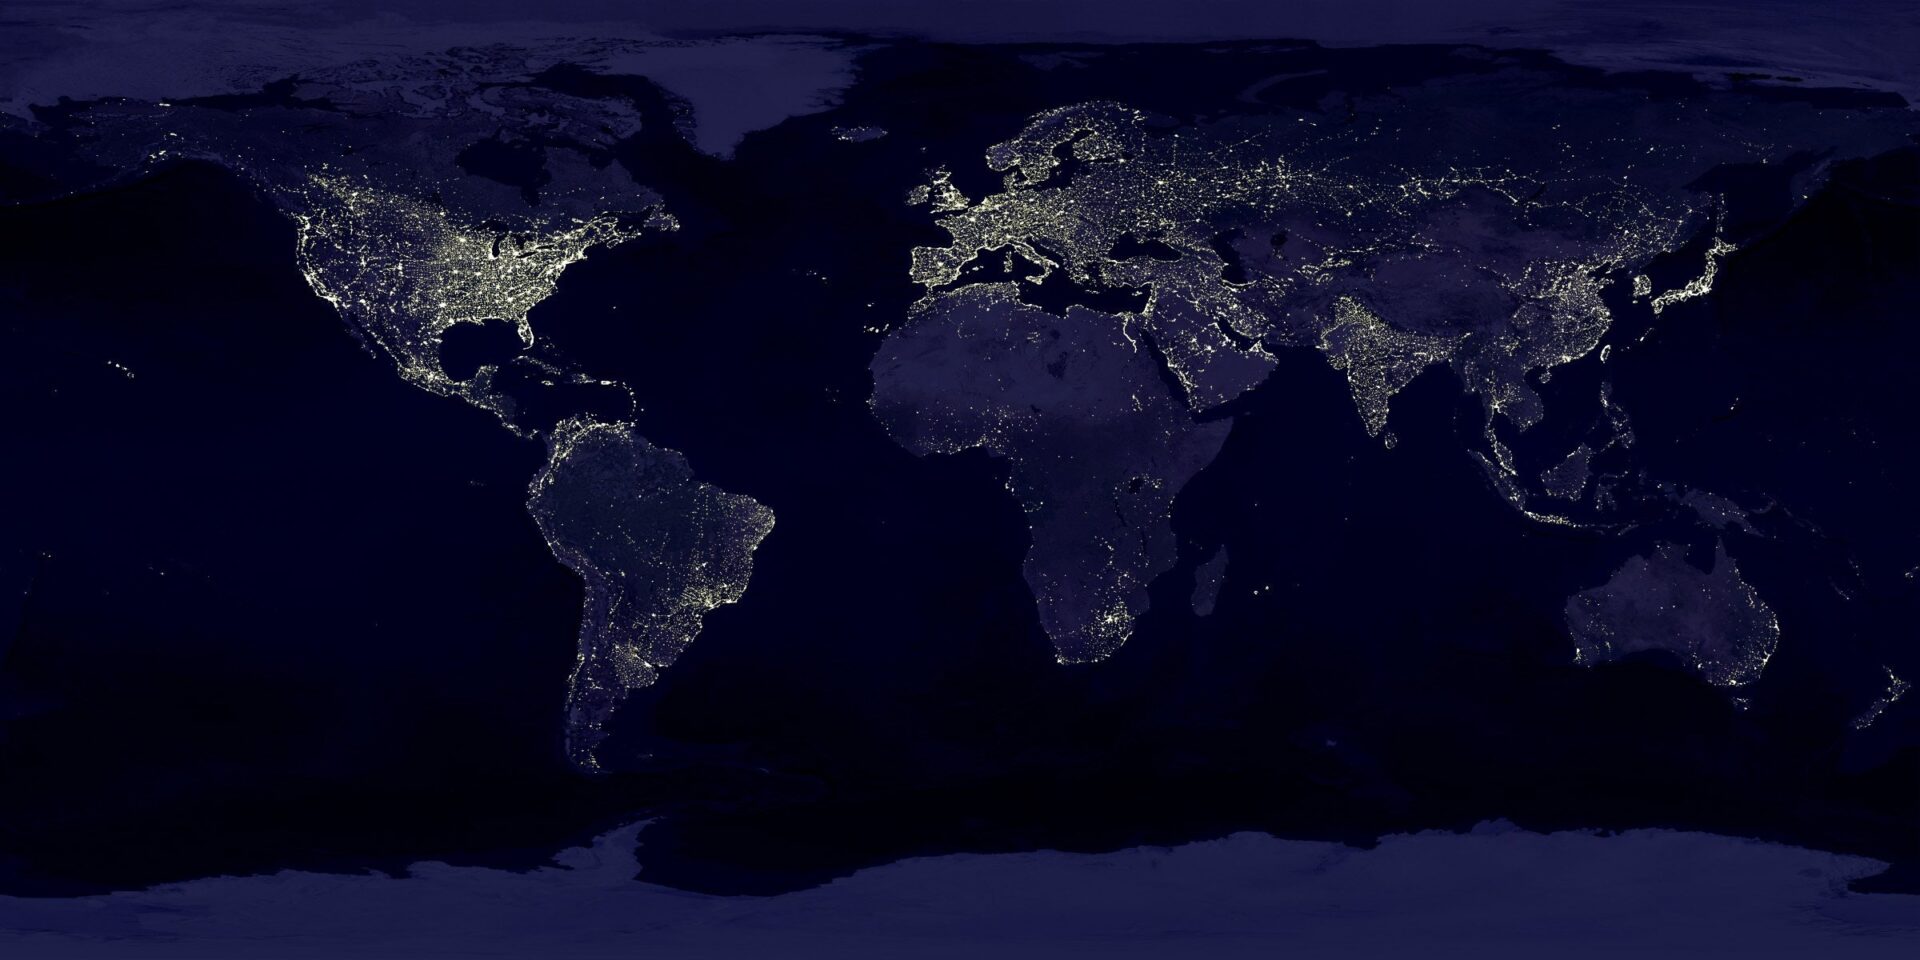 https://horasis.org/wp-content/uploads/World-with-night-lights.jpeg